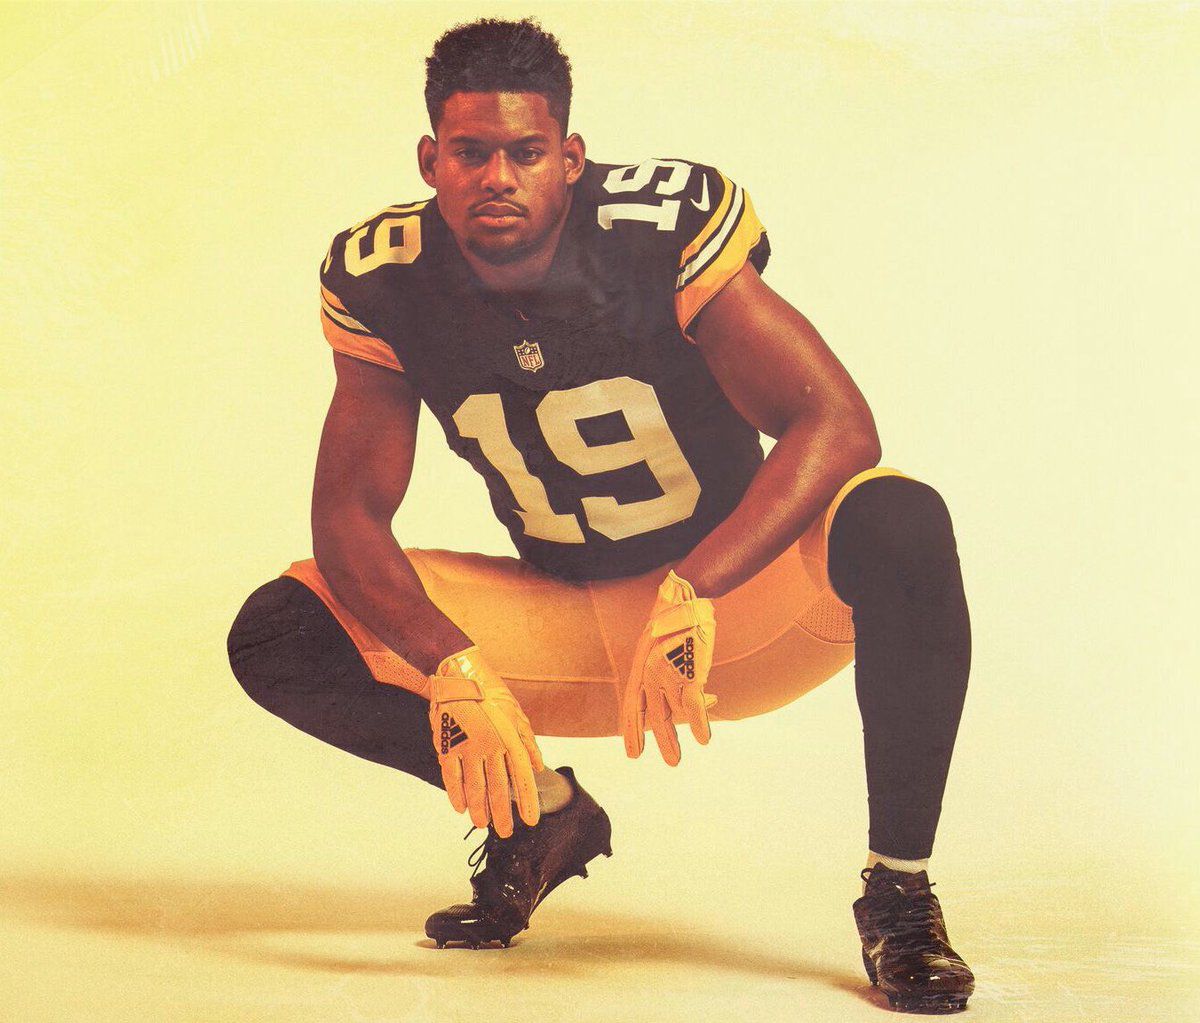 If the Steelers wear a throwback/alternate jersey, what should it